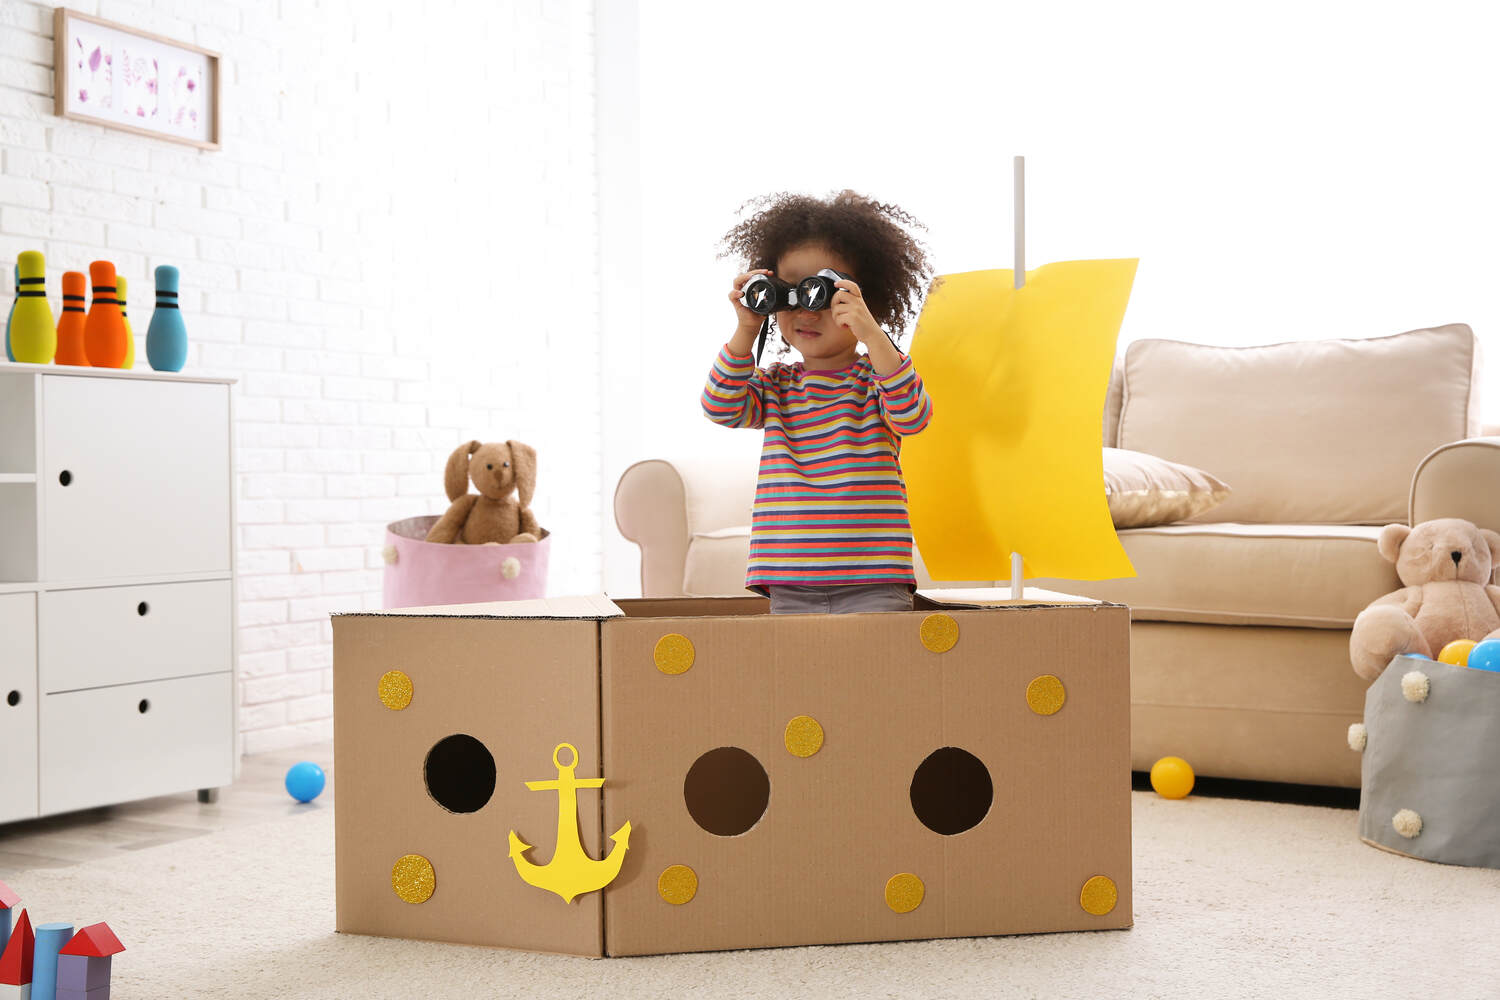 How can I encourage my toddler's imagination